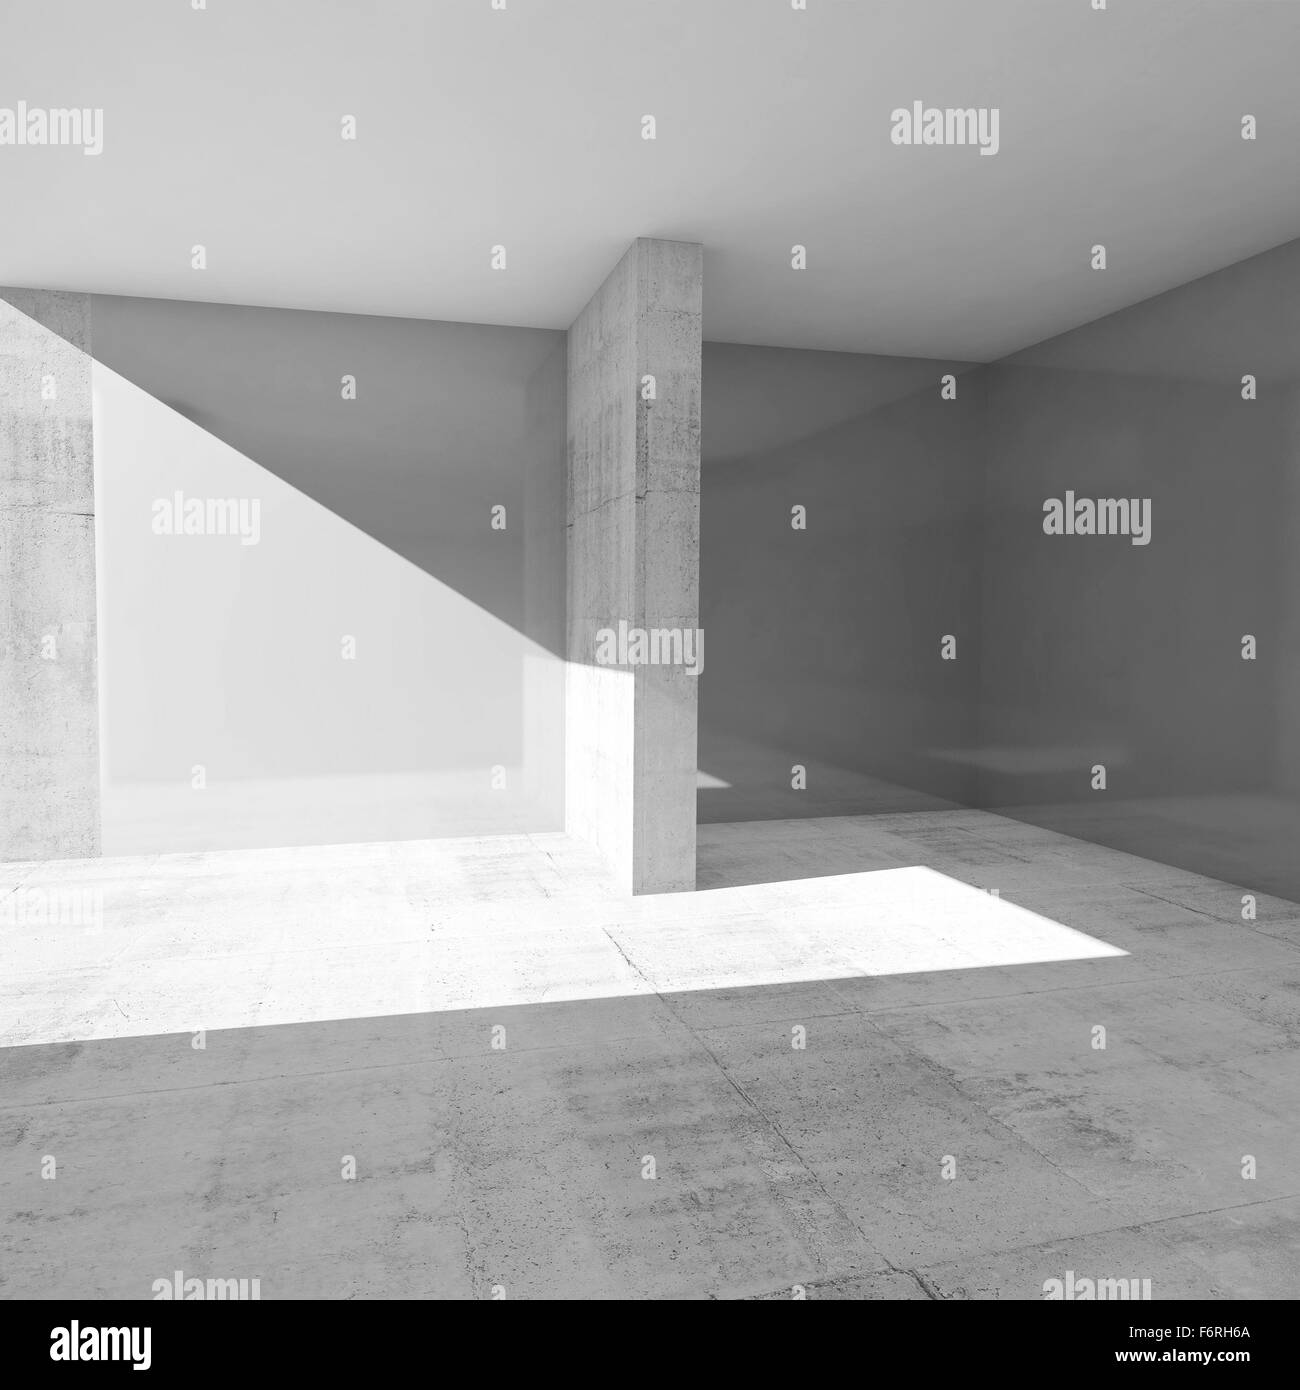 Abstract empty room interior with gray walls and concrete floor, 3d illustration Stock Photo